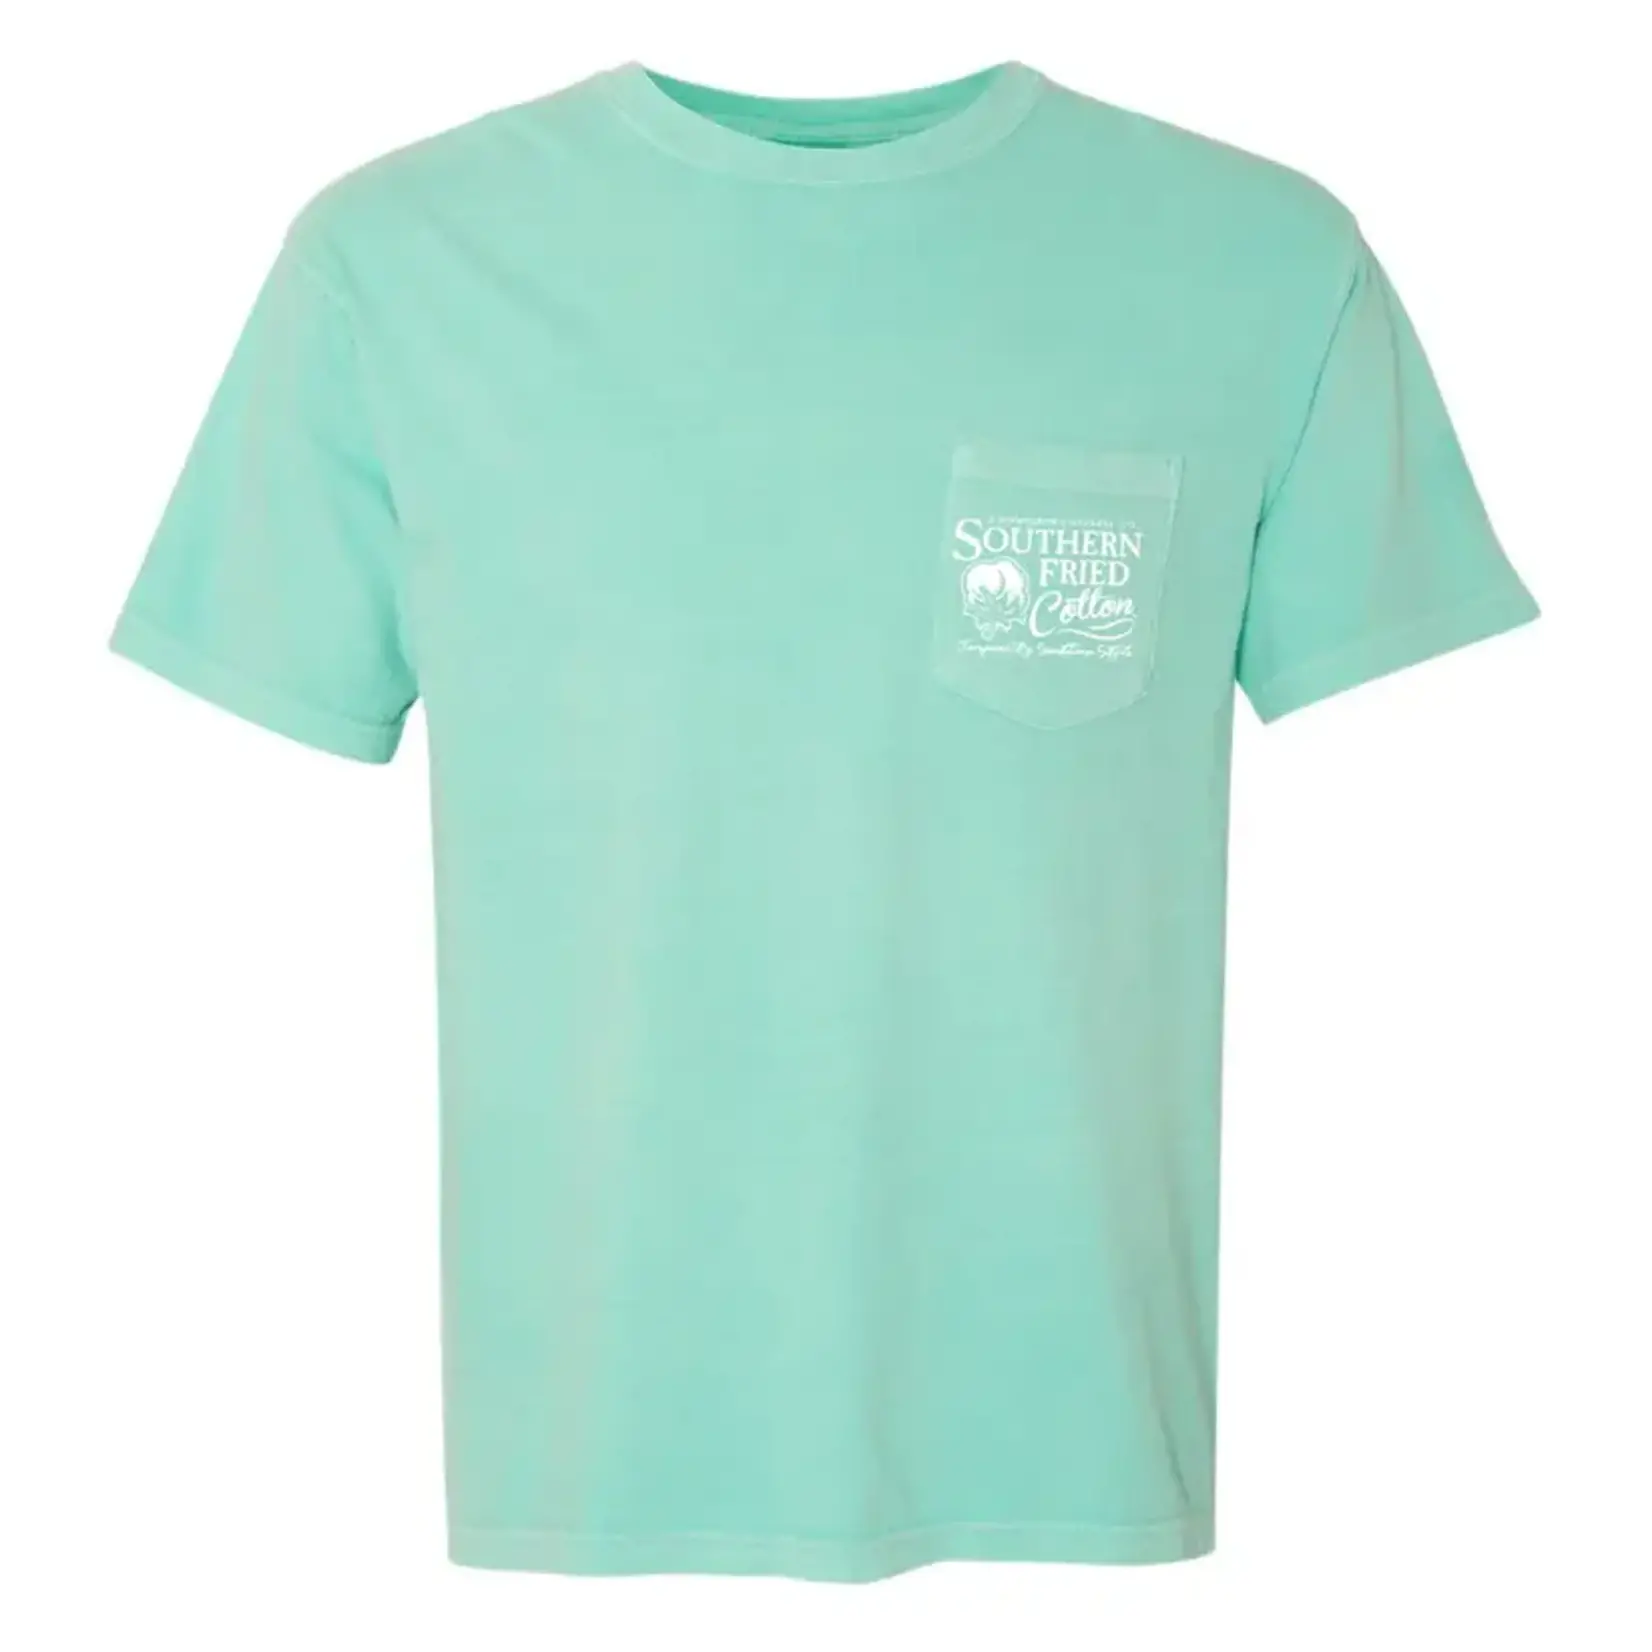 Southern Fried Cotton Southern Fried Cotton Women's National Forest S/S TEE Shirt